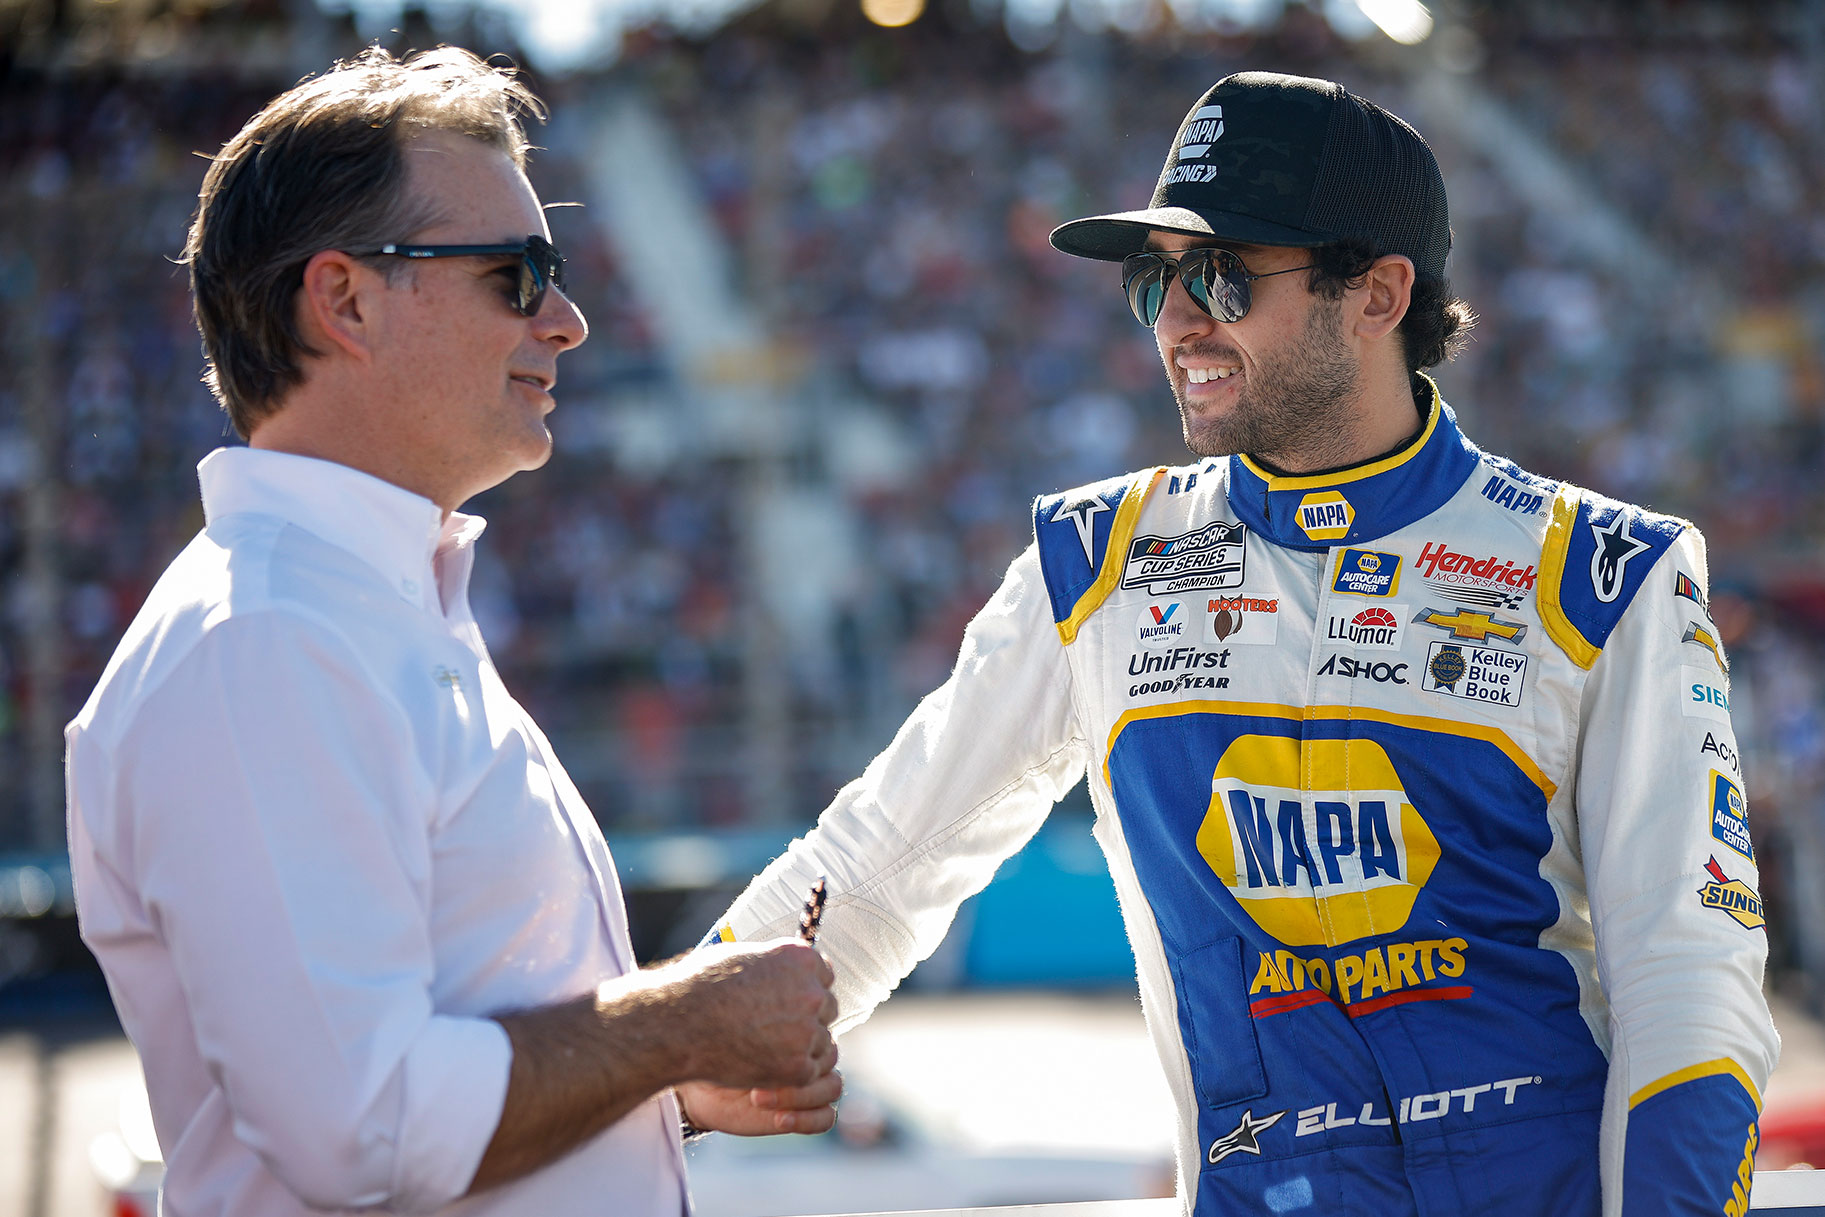 Chase Elliott, driver of the #9 NAPA Auto Parts Chevrolet, and Jeff Gordon, Vice Chairman of Hendrick Motorsports talk on the grid prior to the NASCAR Cup Series Championship at Phoenix Raceway